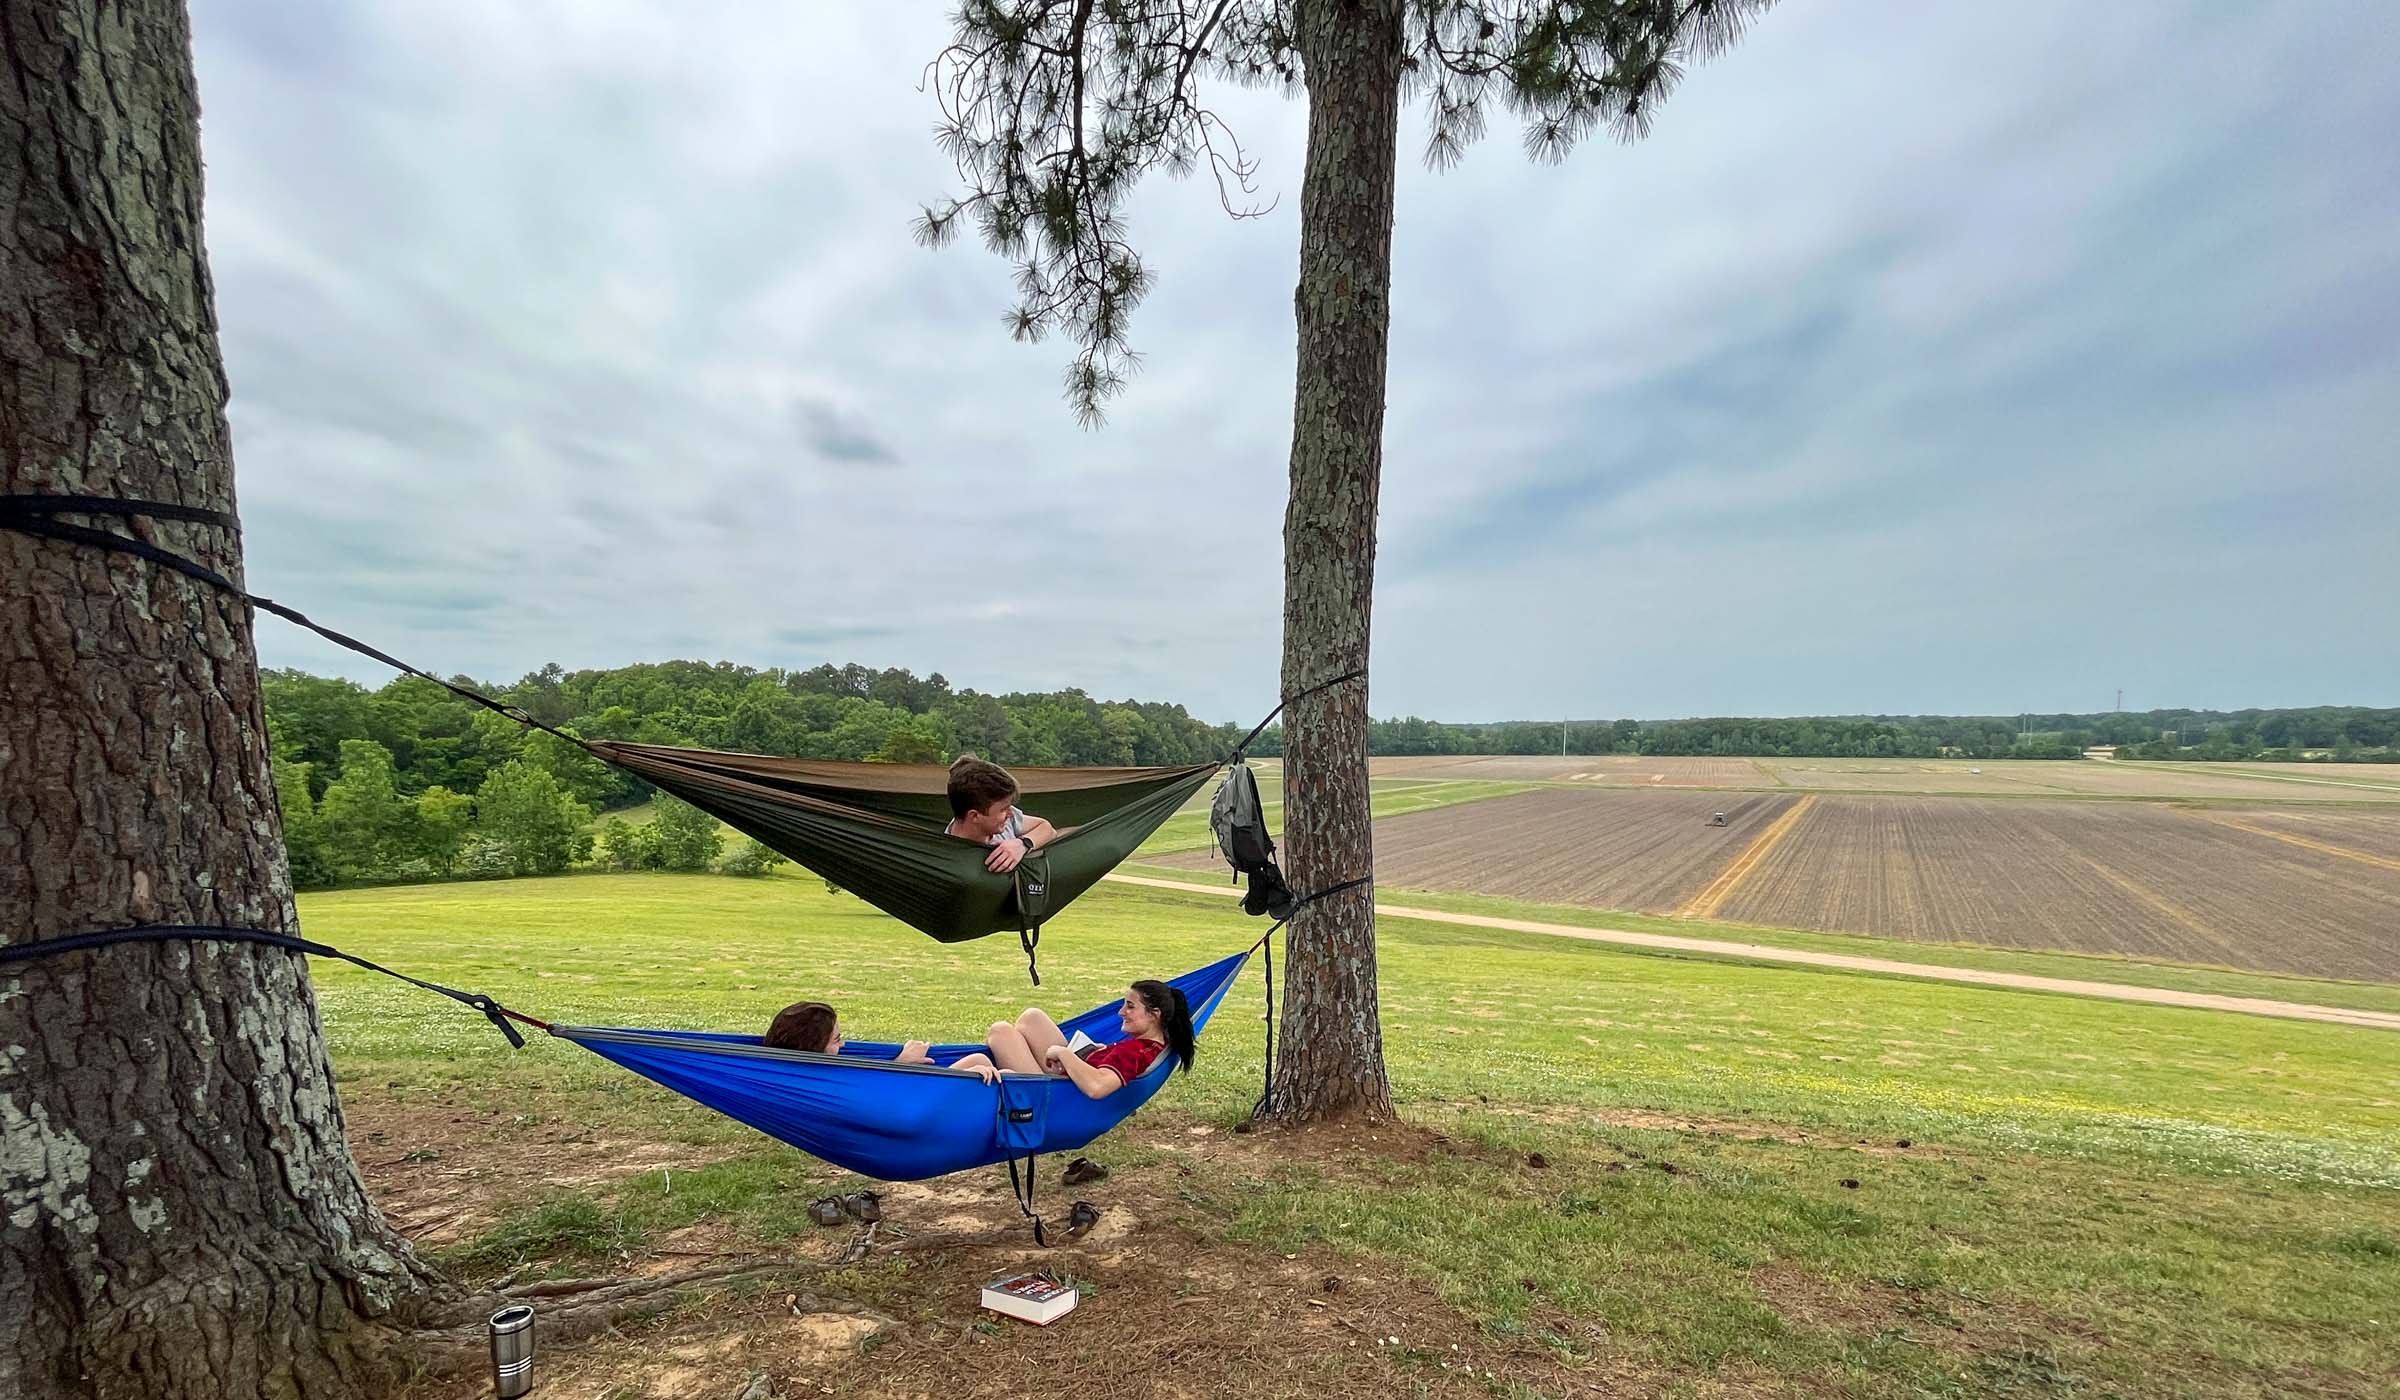 Three students relax in two hammocks hung between hilltop trees with views down over freshly plowed North Farm fields.